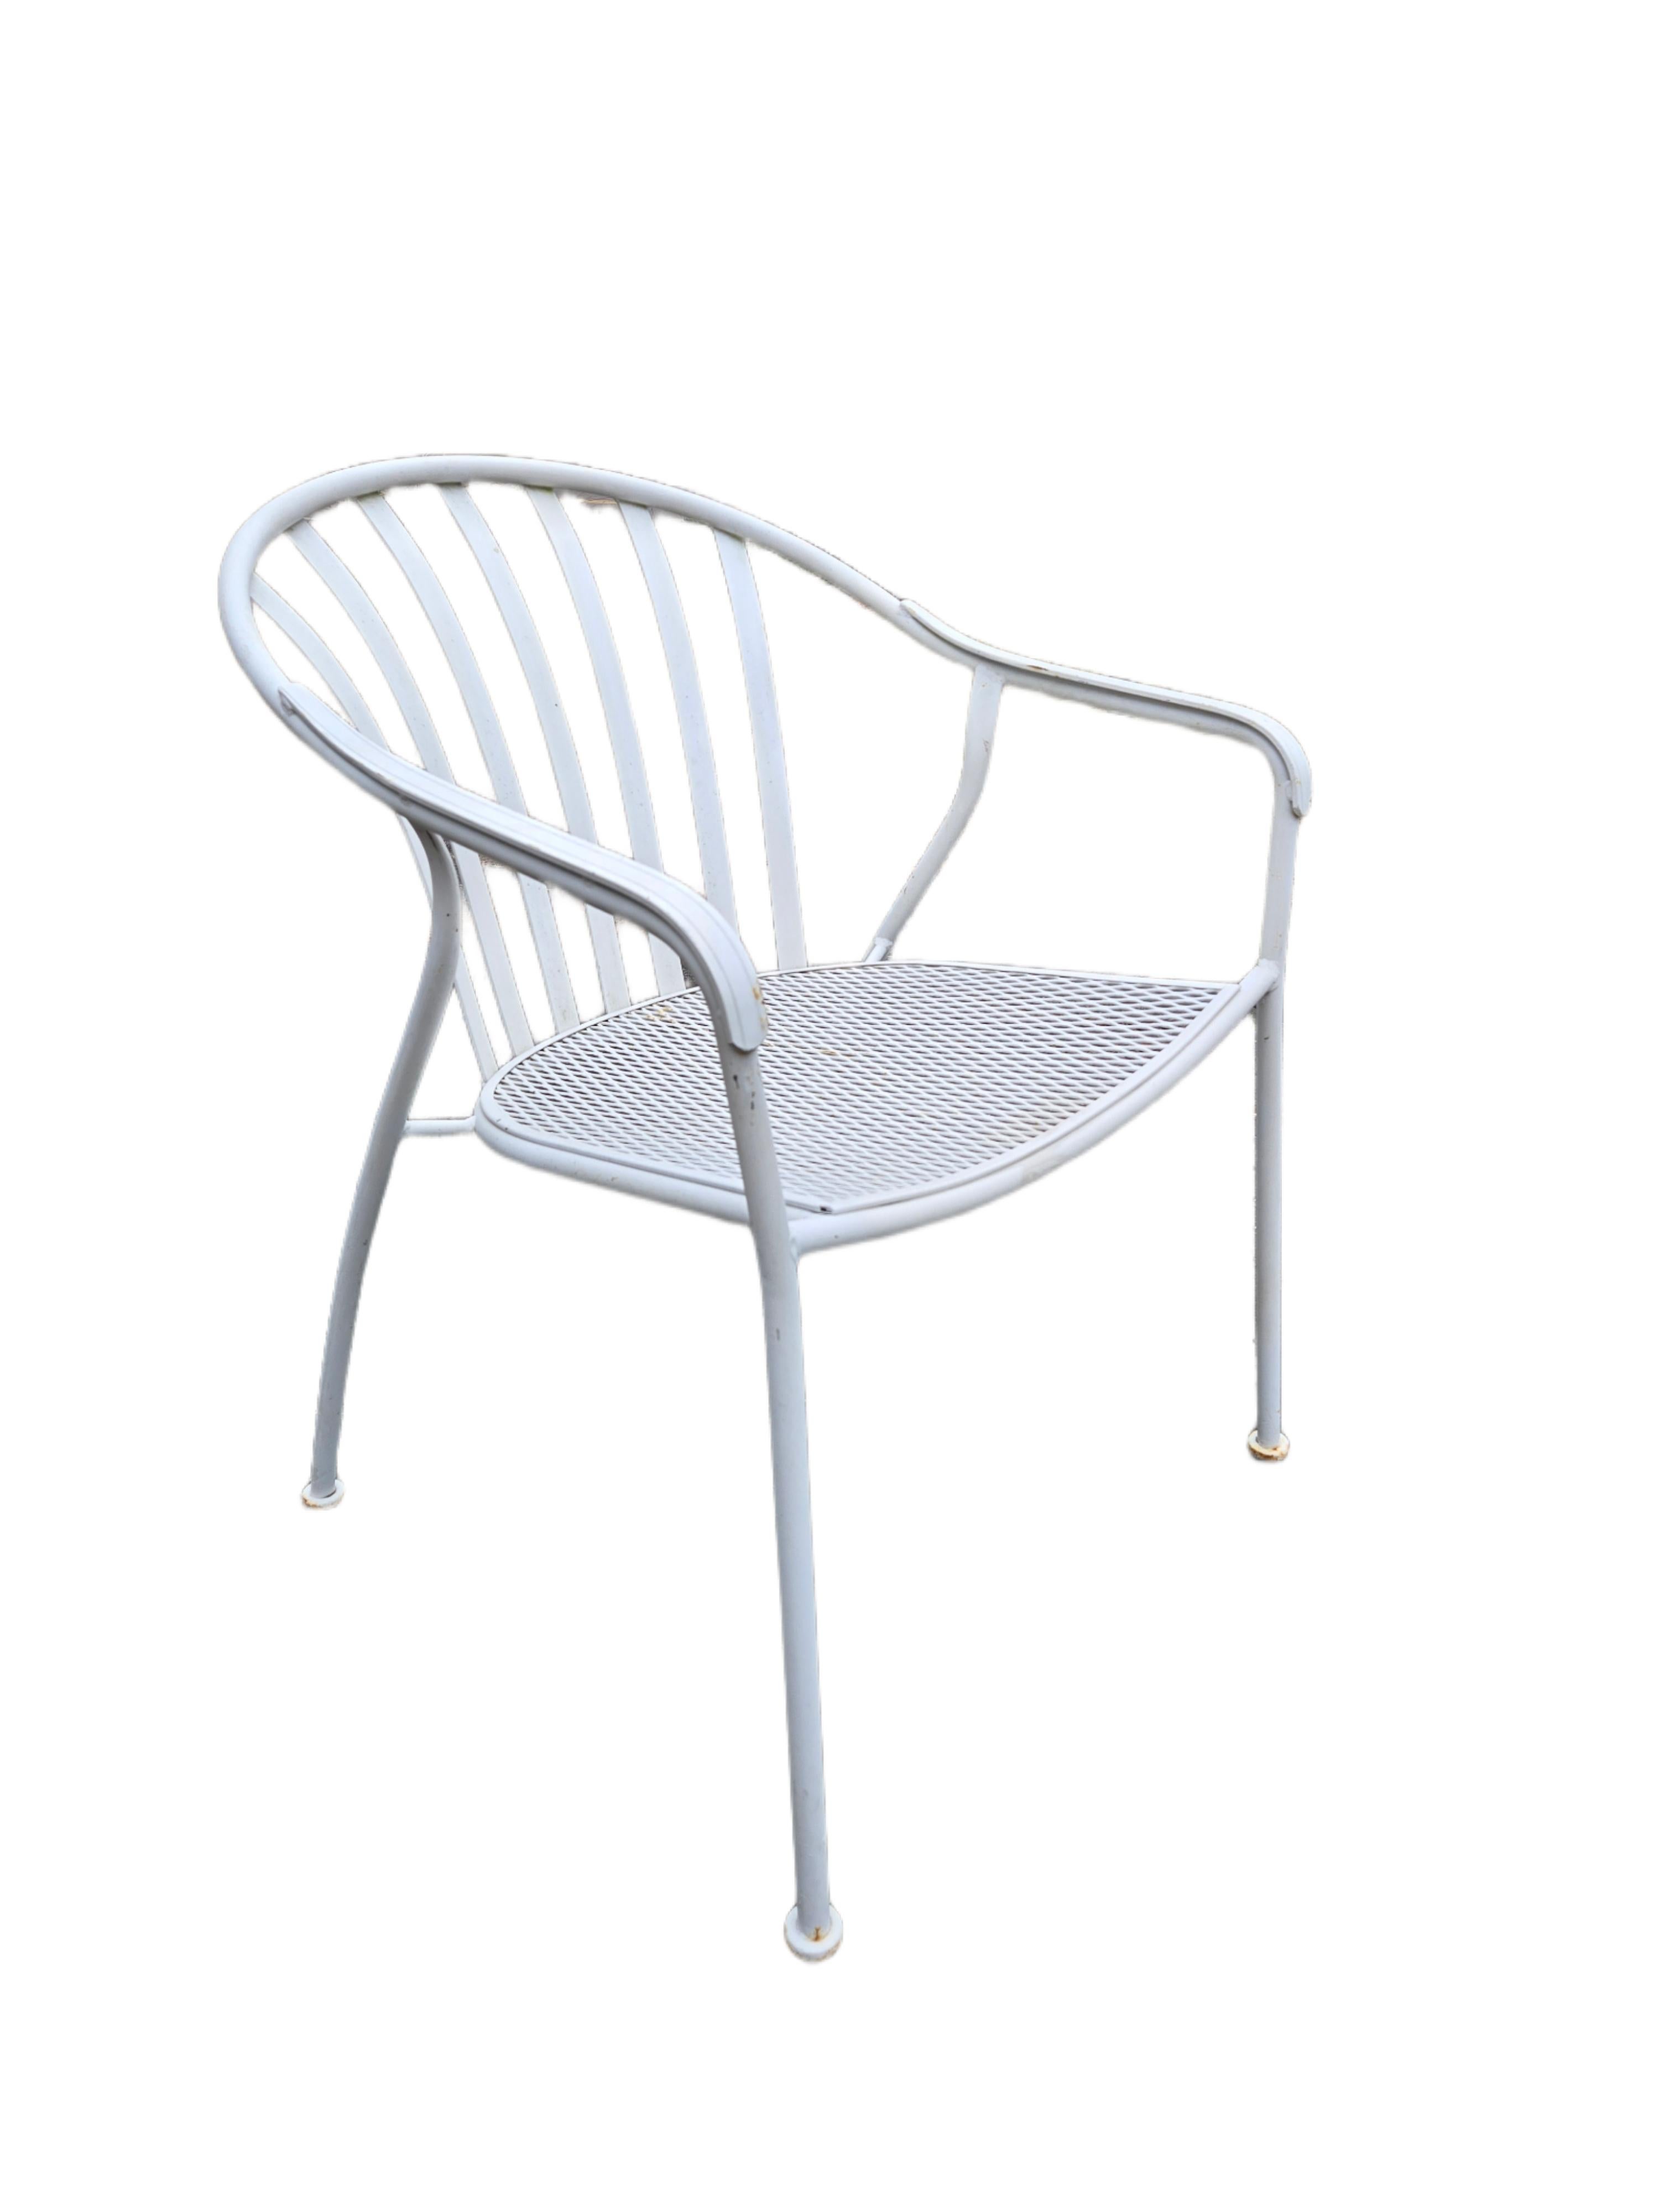 This is a beautiful set of vintage patio furniture by Woodard, a renowned brand in outdoor furniture. The set includes a 10 Wrought Iron Arm Chairs. An excellent choice for any patio, balcony, or pool.


Made of high-quality wrought iron and metal,